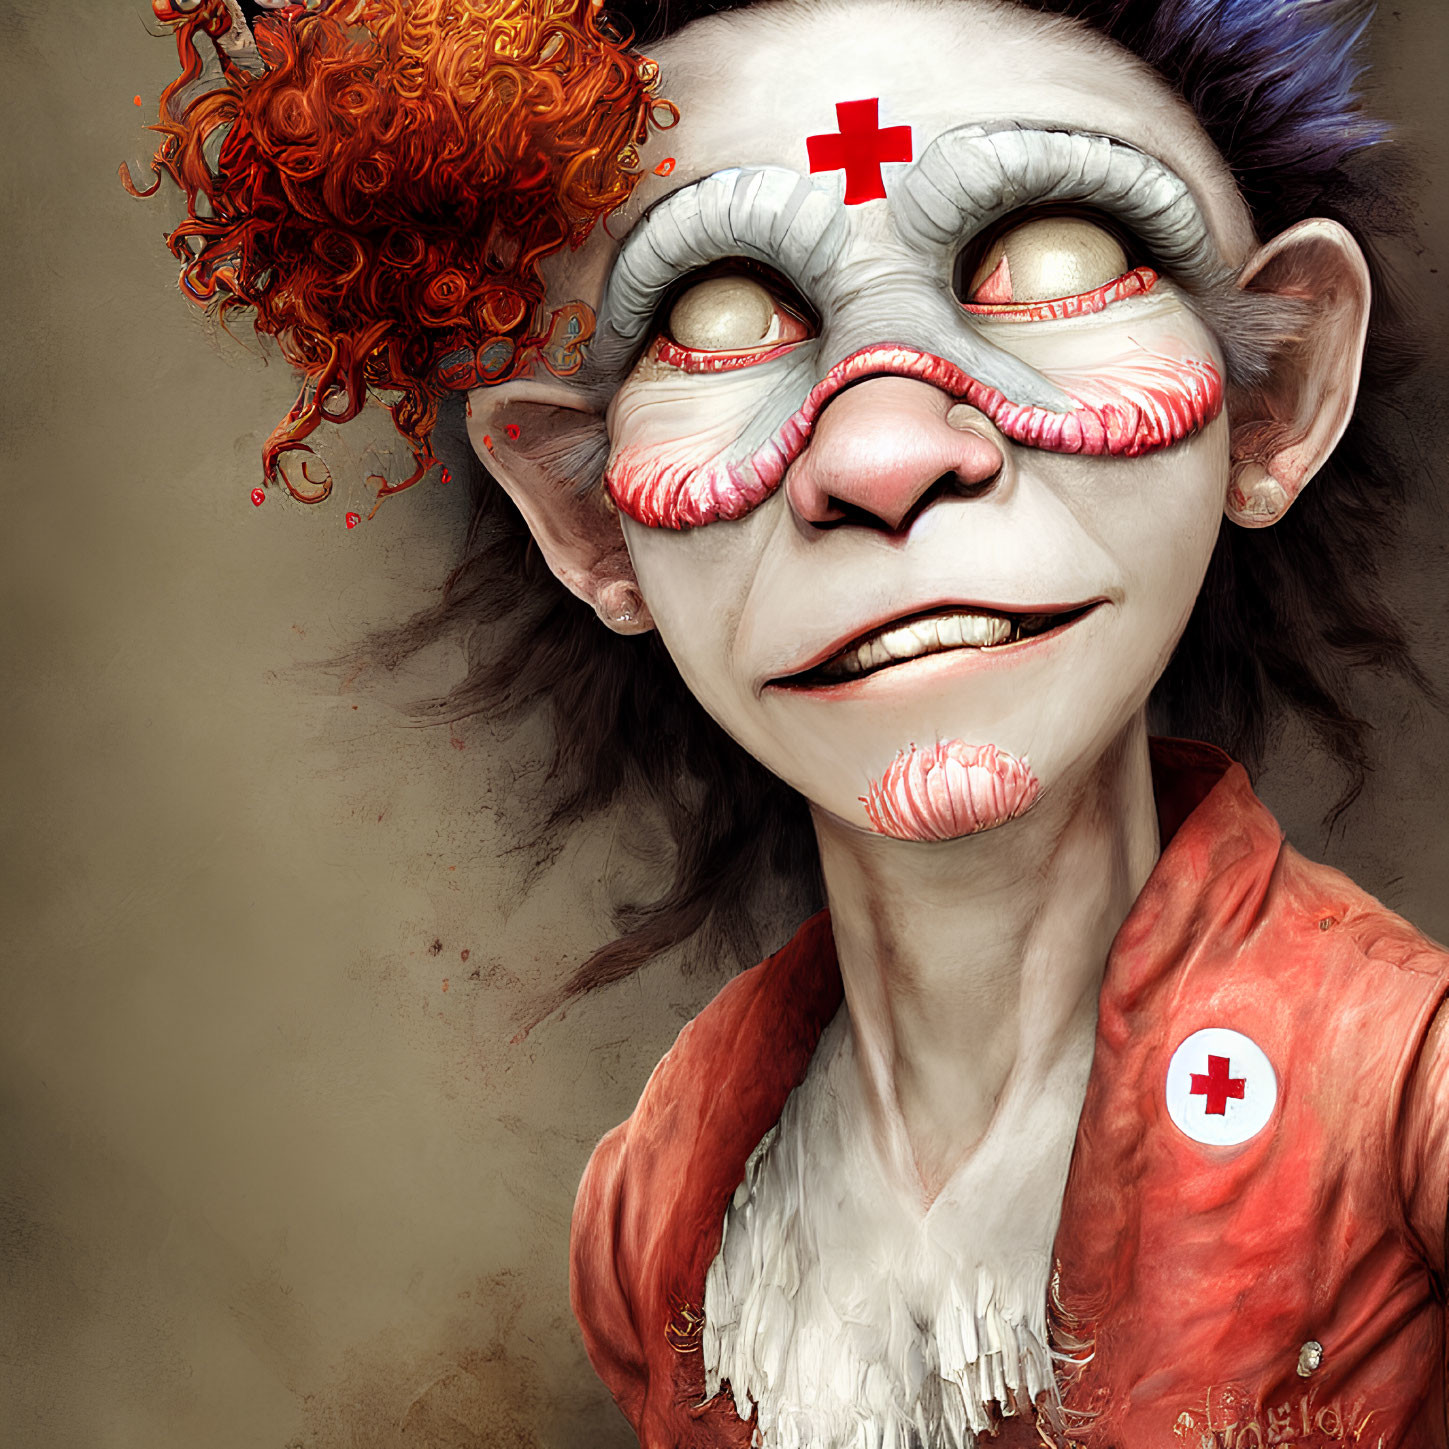 Whimsical creature in nurse-like attire with red curly hair and playful expression